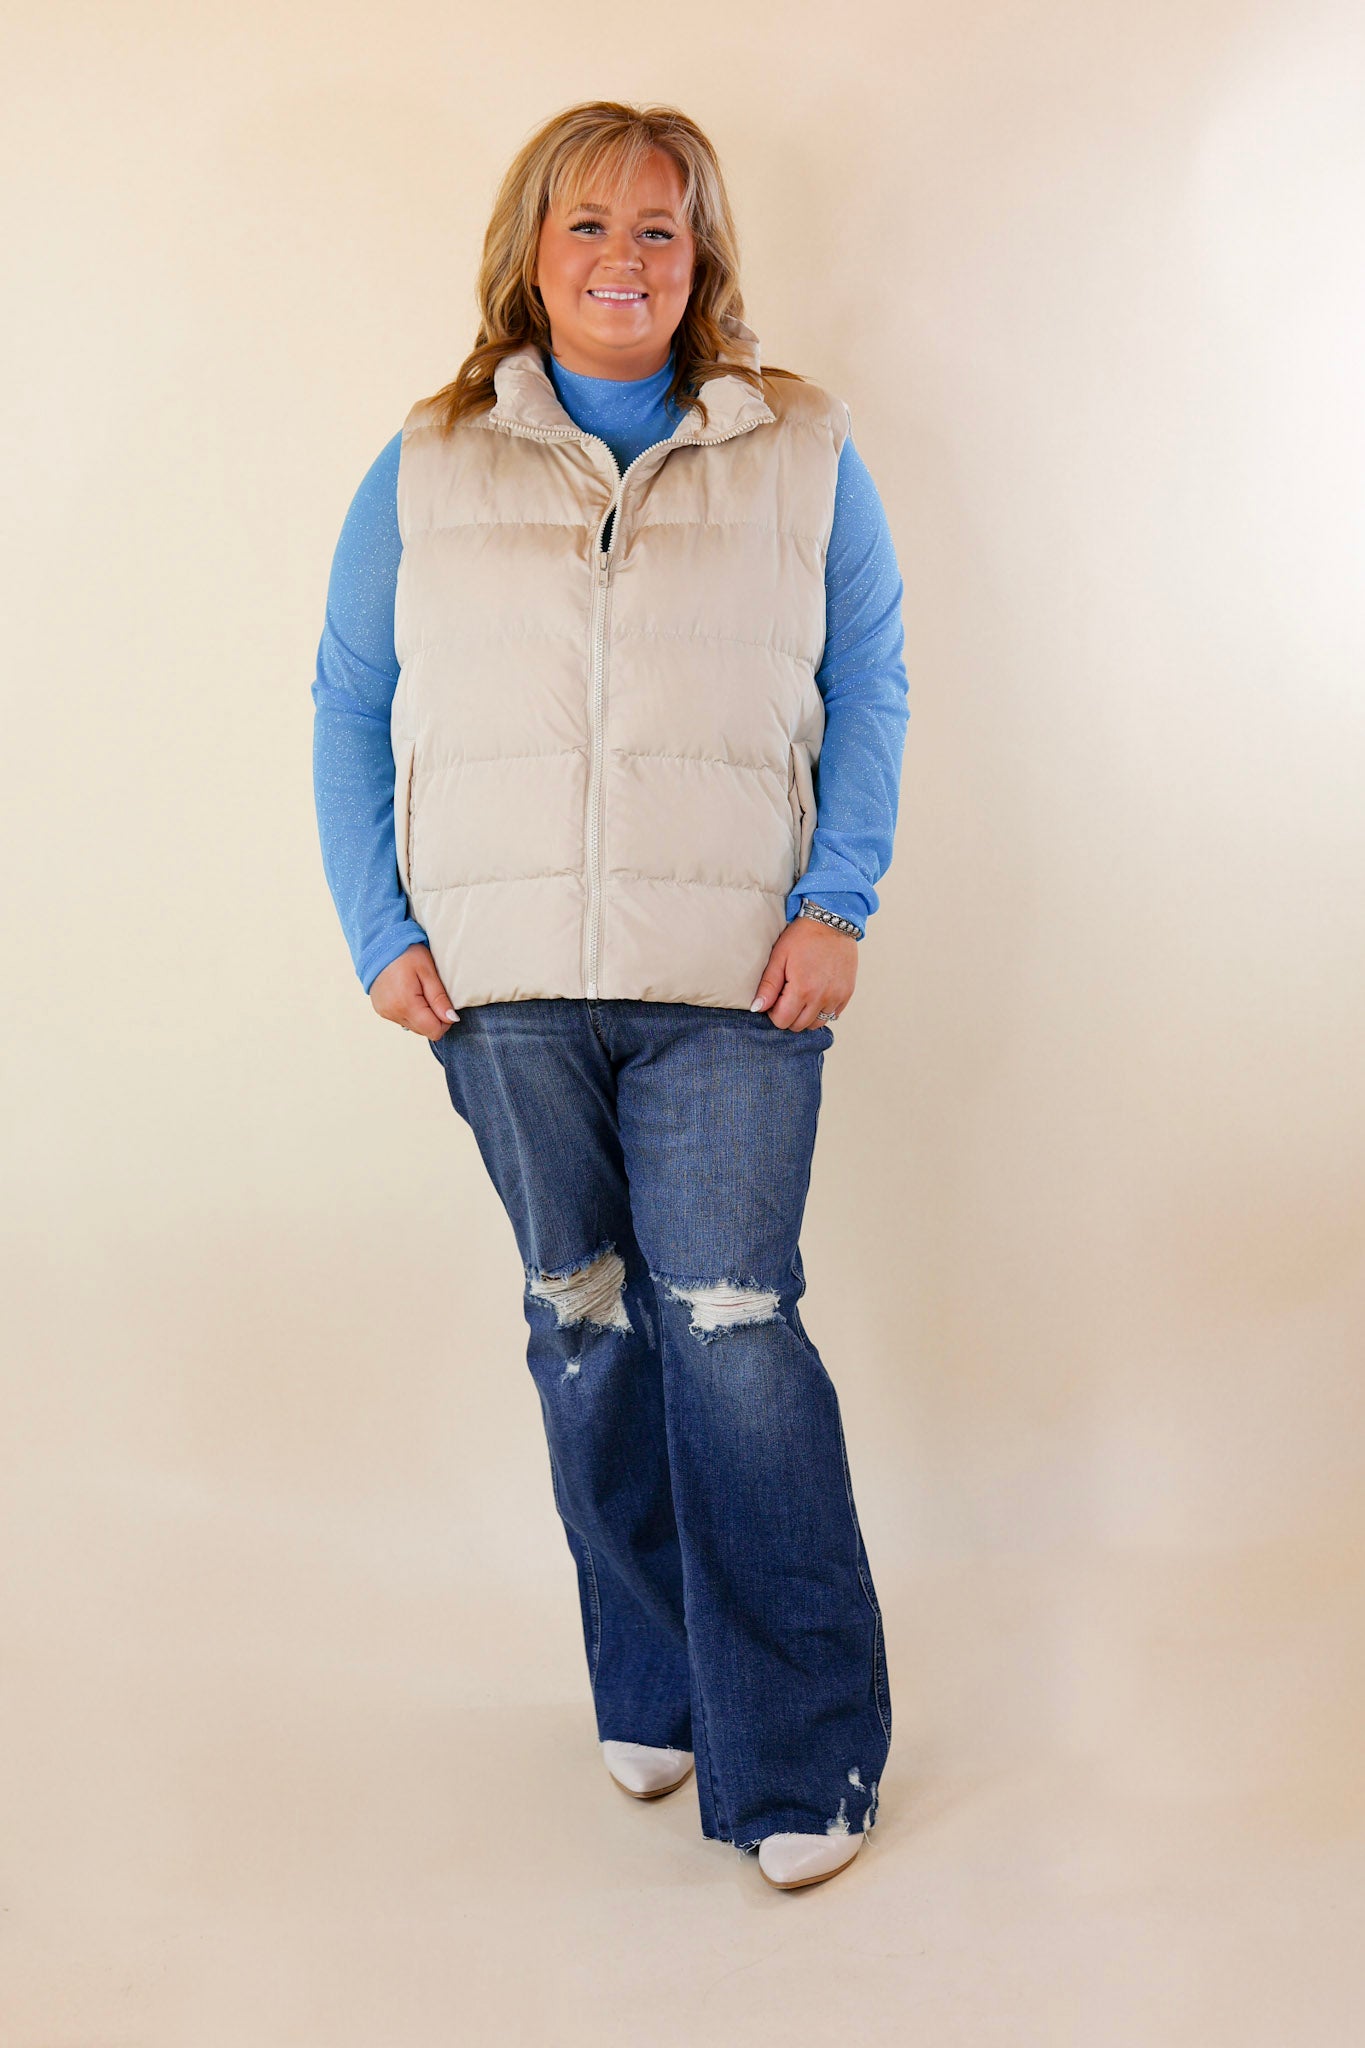 Whispering Pines Puffer Vest in Beige - Giddy Up Glamour Boutique